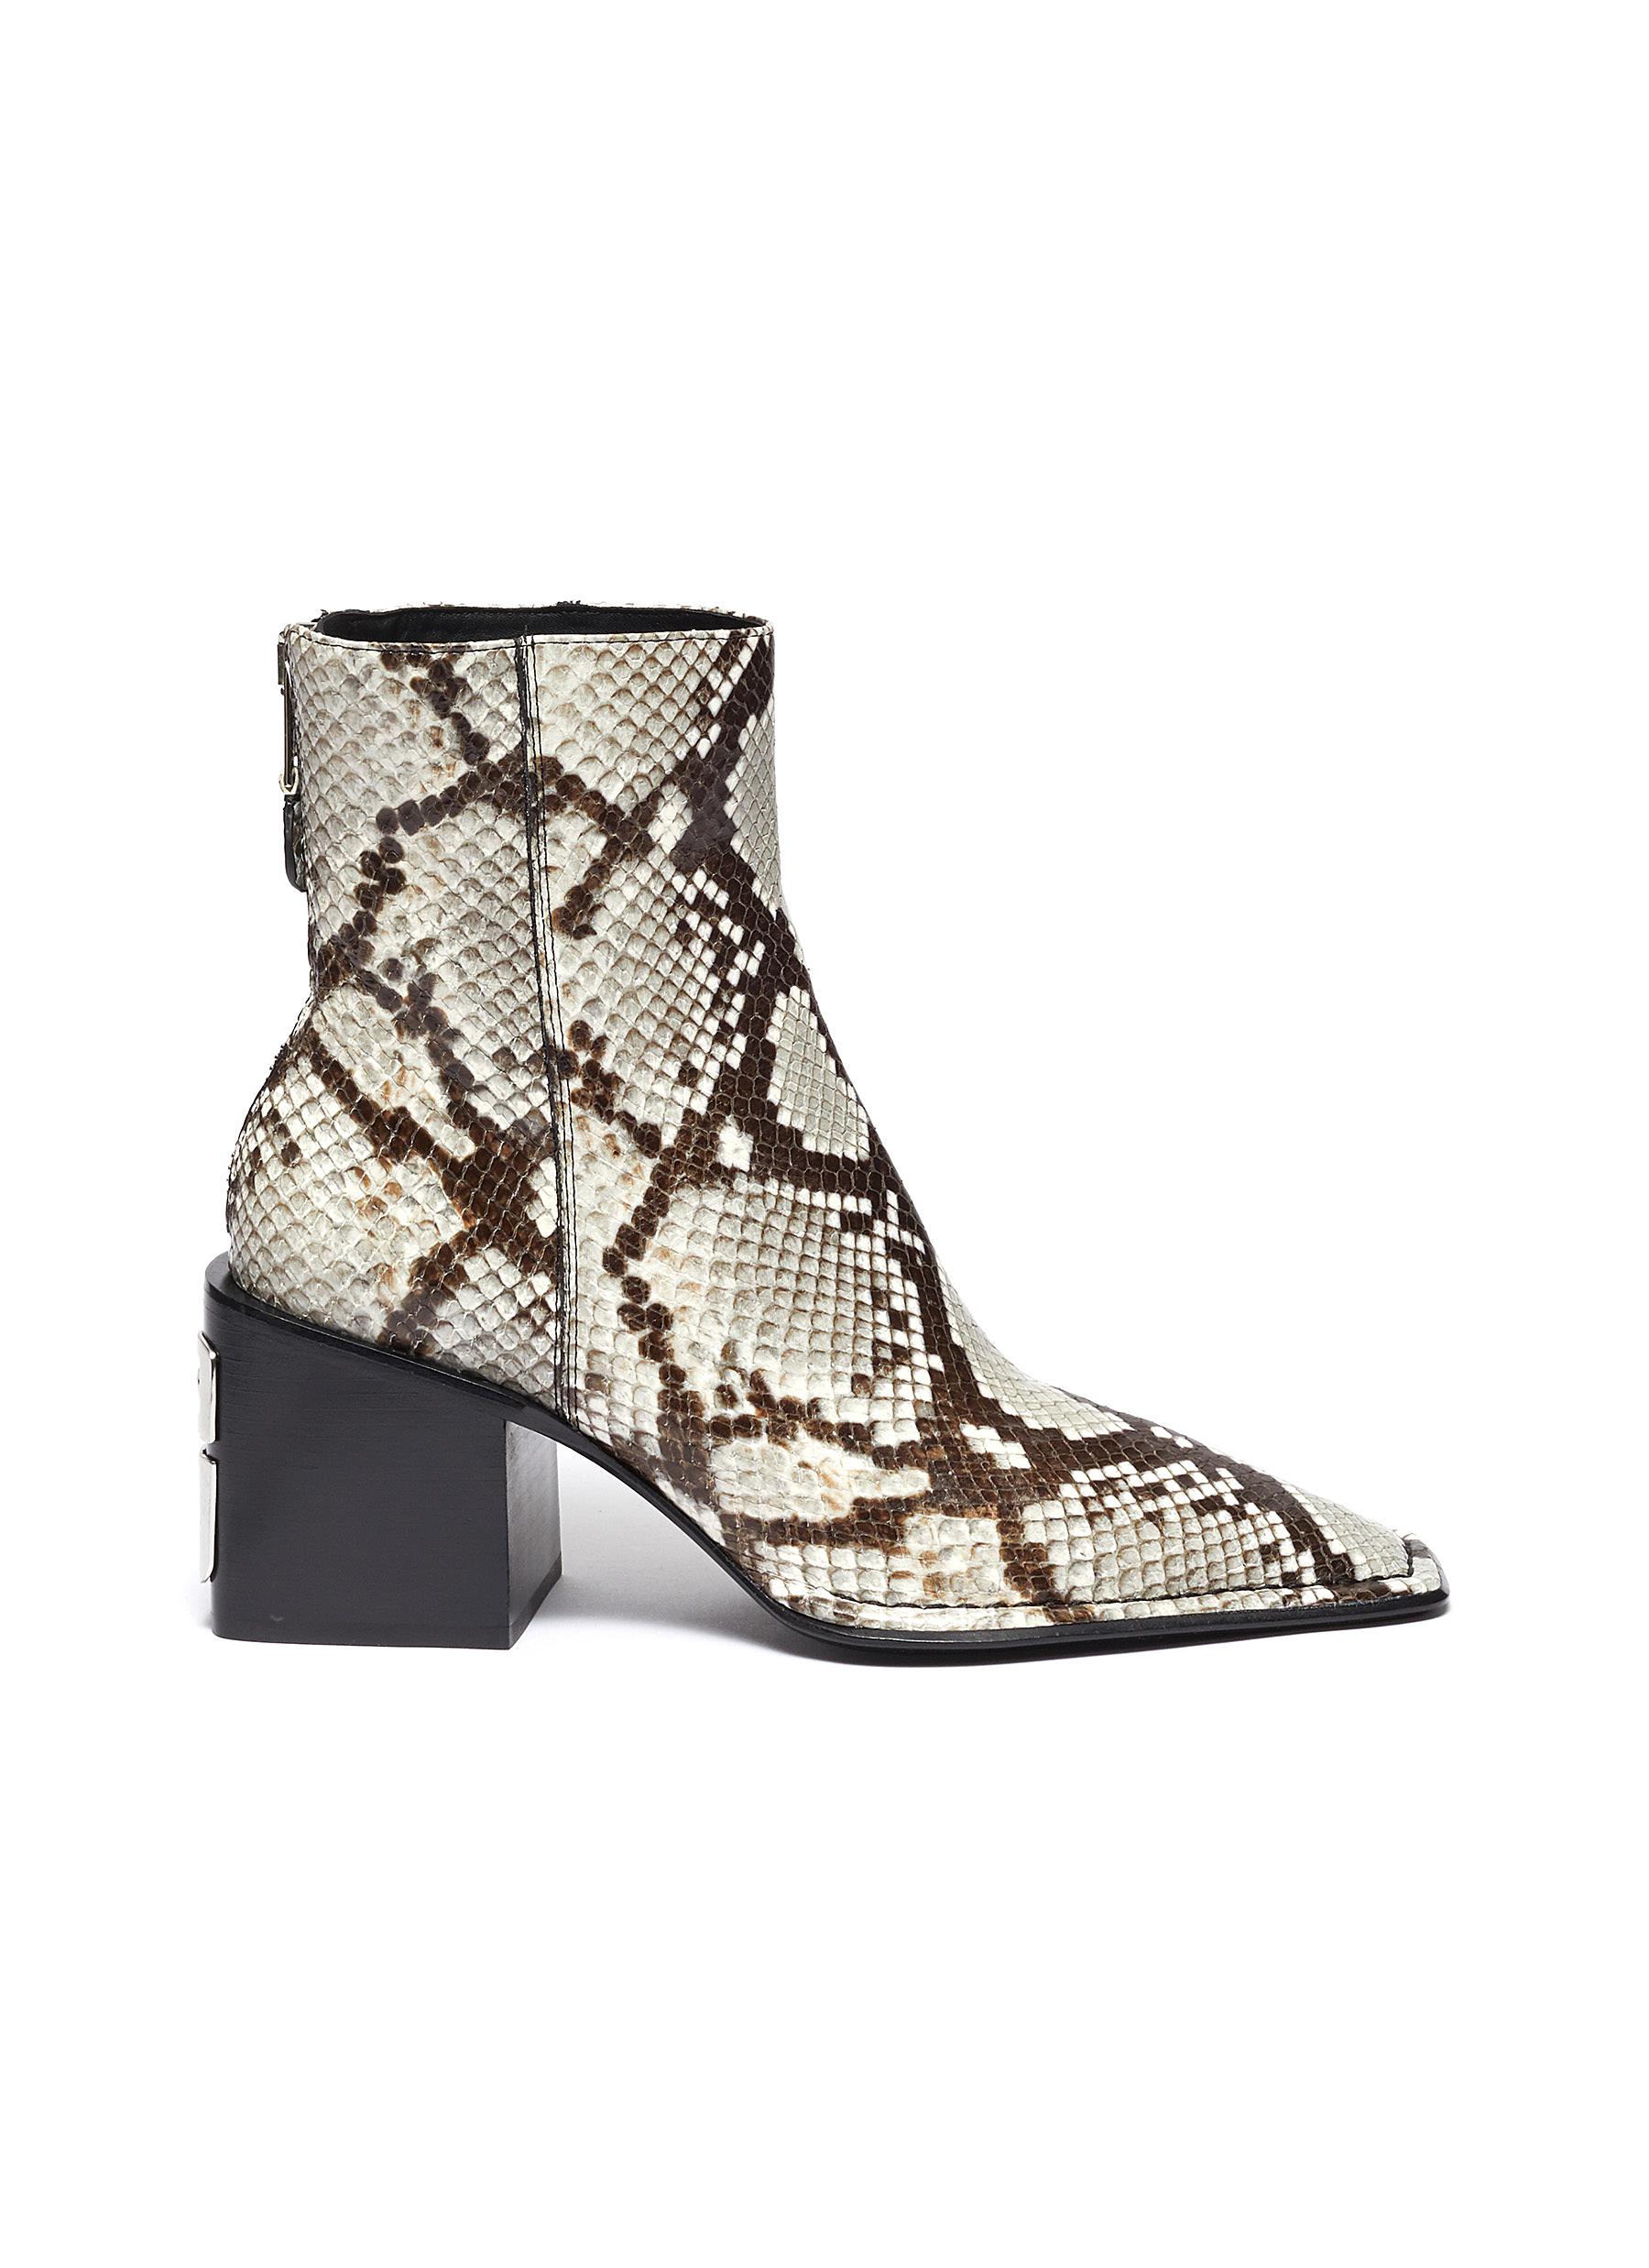 Parker snake embossed leather ankle boots by Alexanderwang | Coshio ...